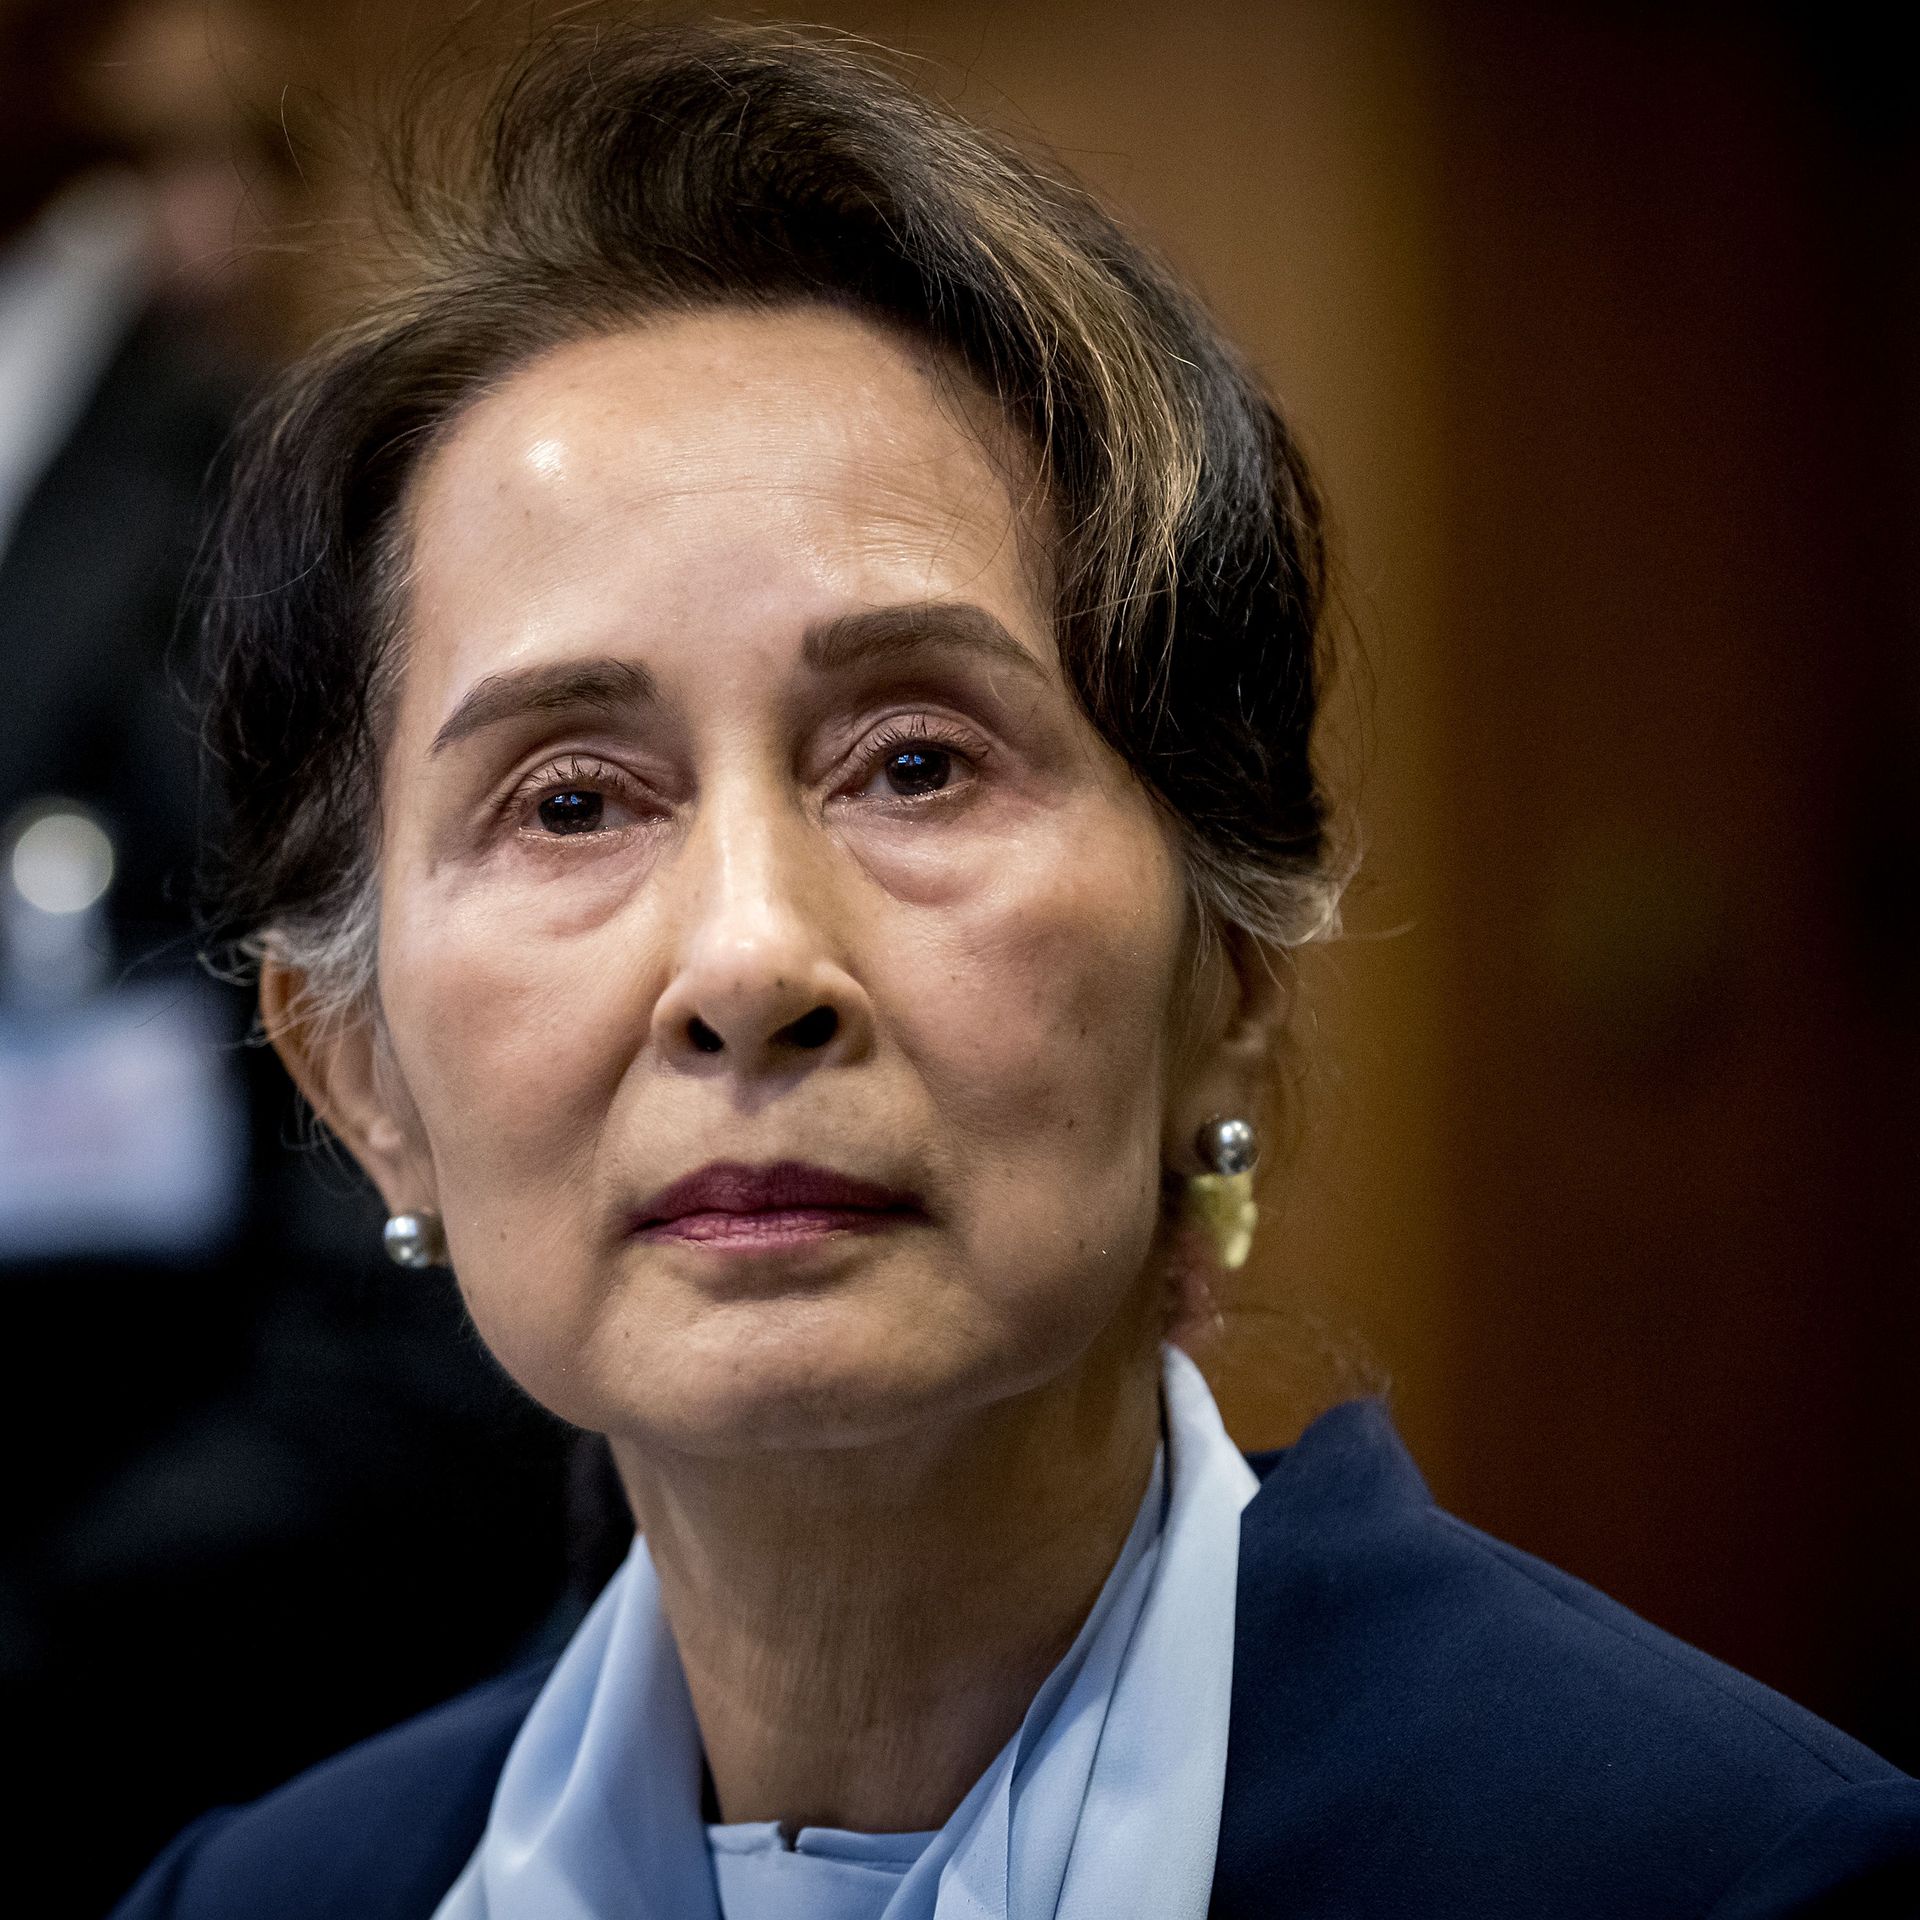 Myanmar's then-State Counsellor Aung San Suu Kyi at the UN's International Court of Justice on December 11, 2019 in the Peace Palace of The Hague,.